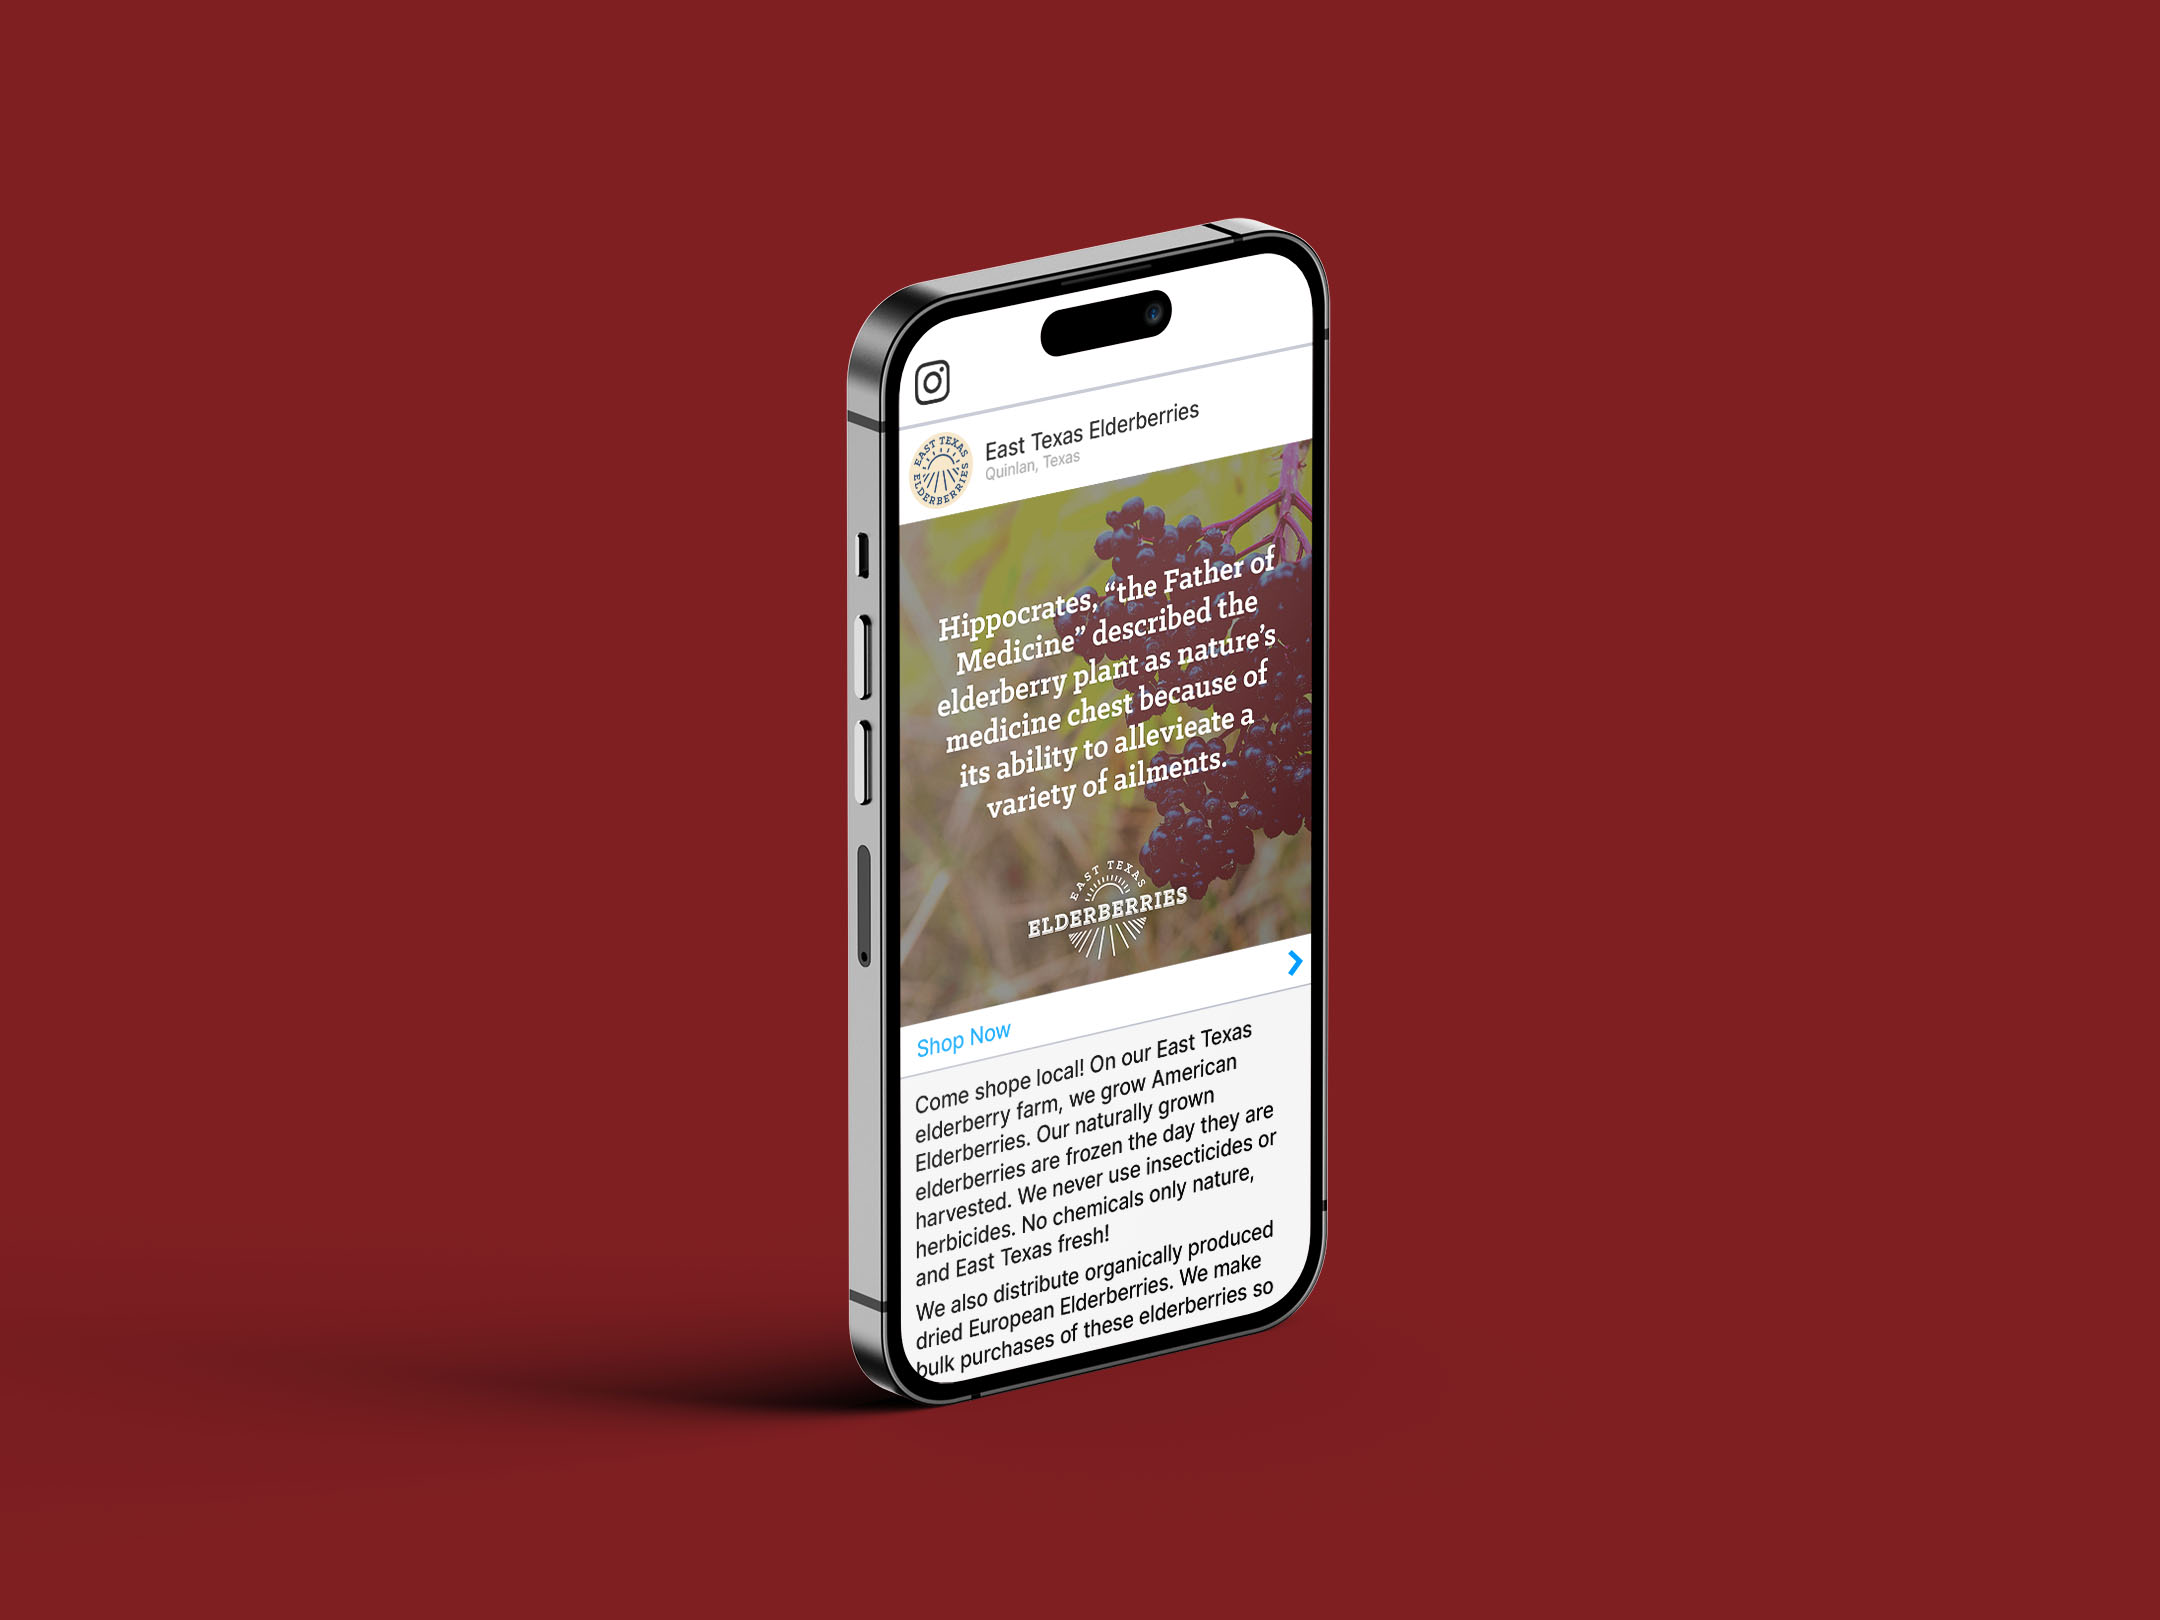 An iPhone showing the instagram ad campaign for East Texas Elderberries